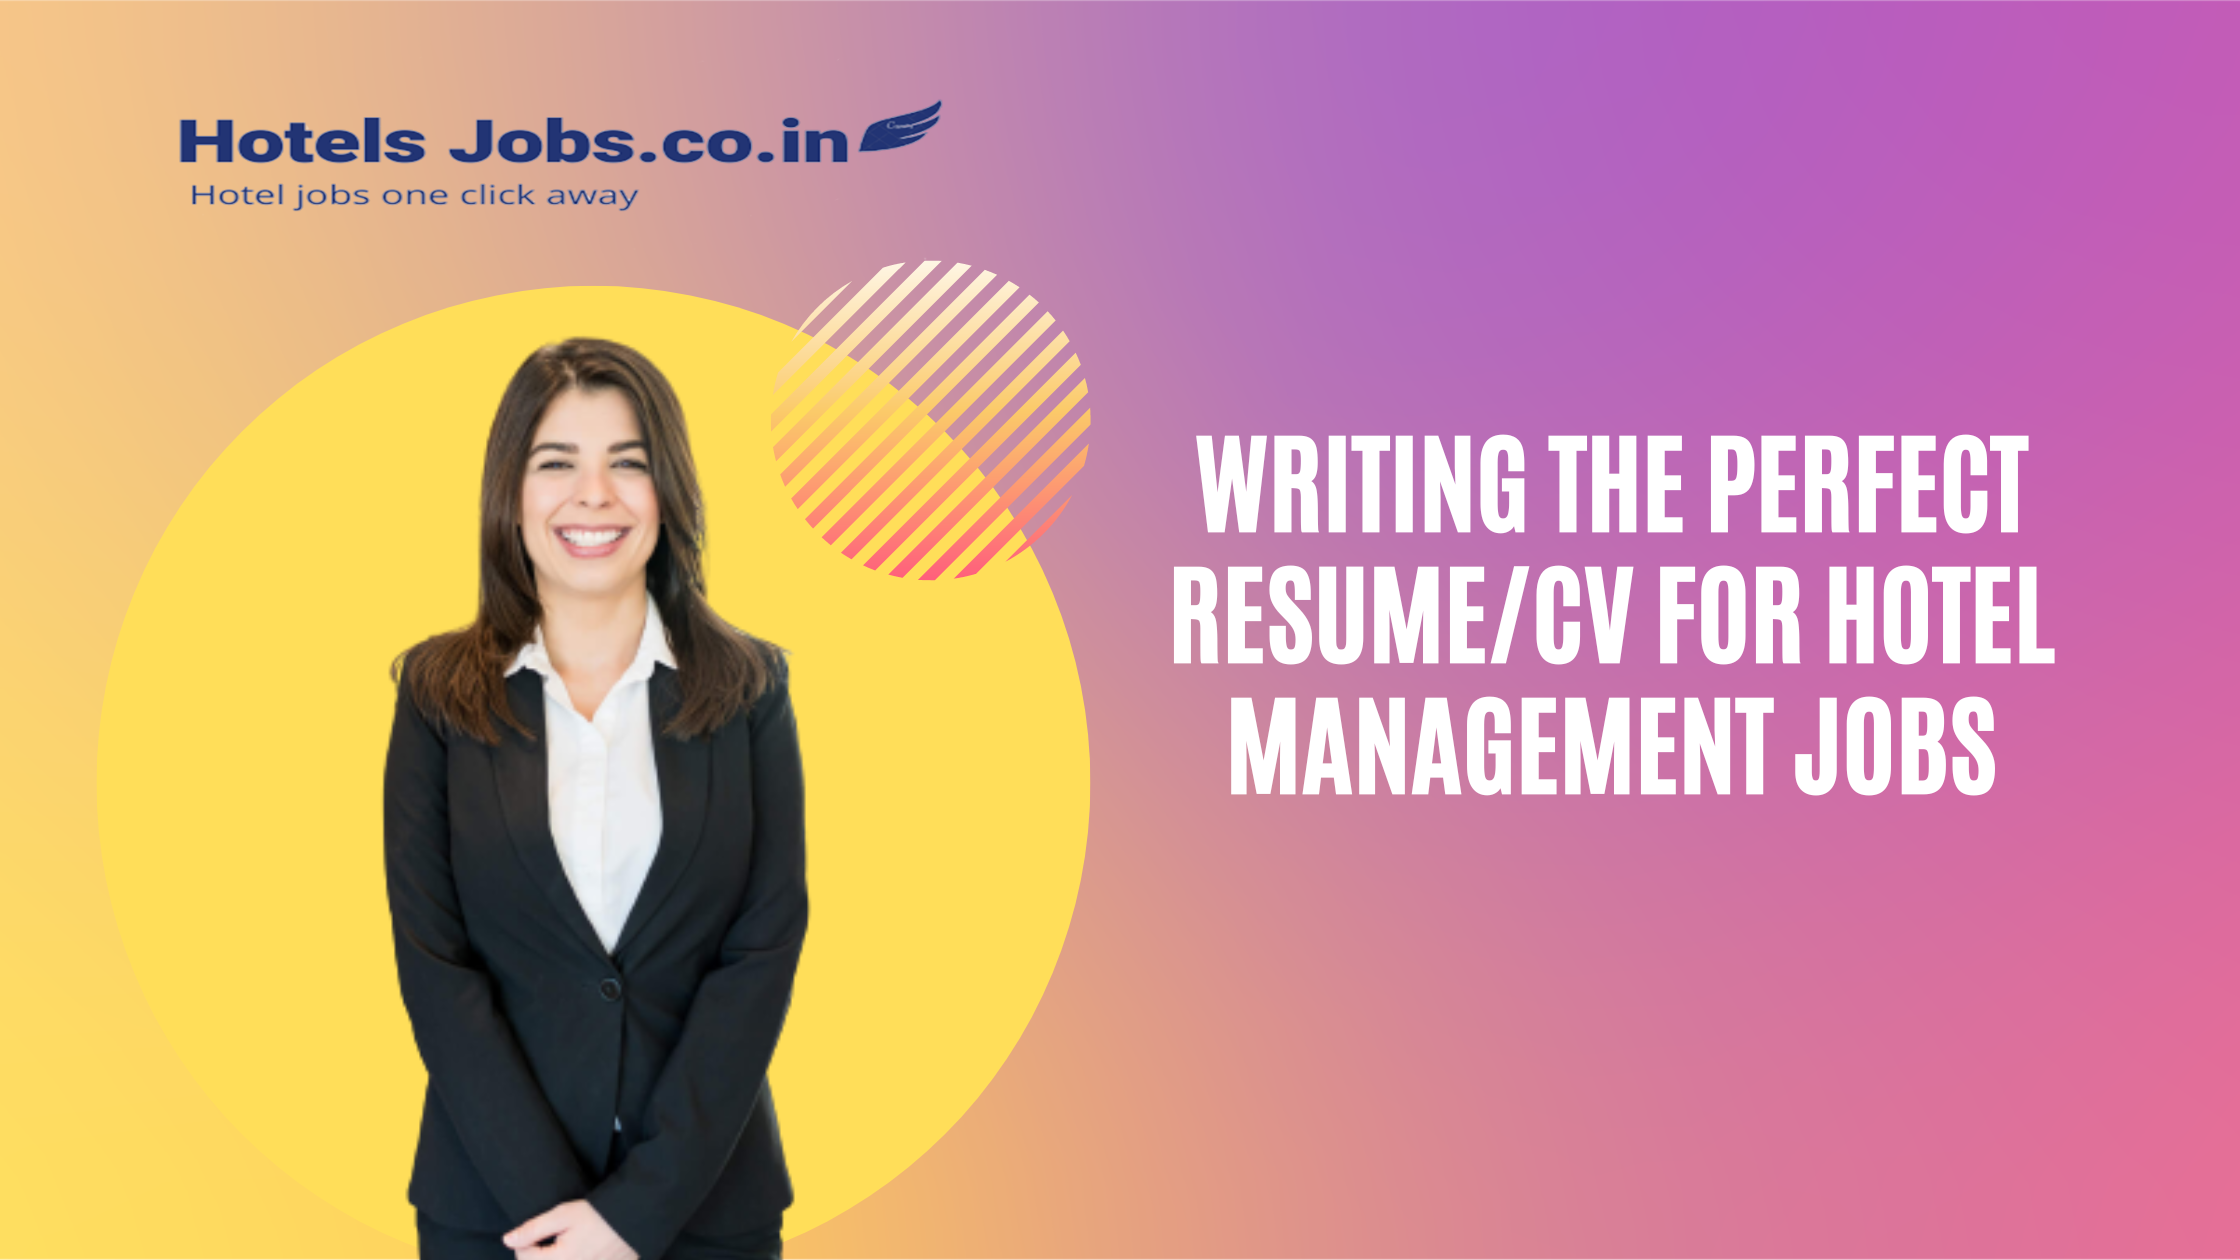 Writing The Perfect Resume/CV For Hotel Management Jobs